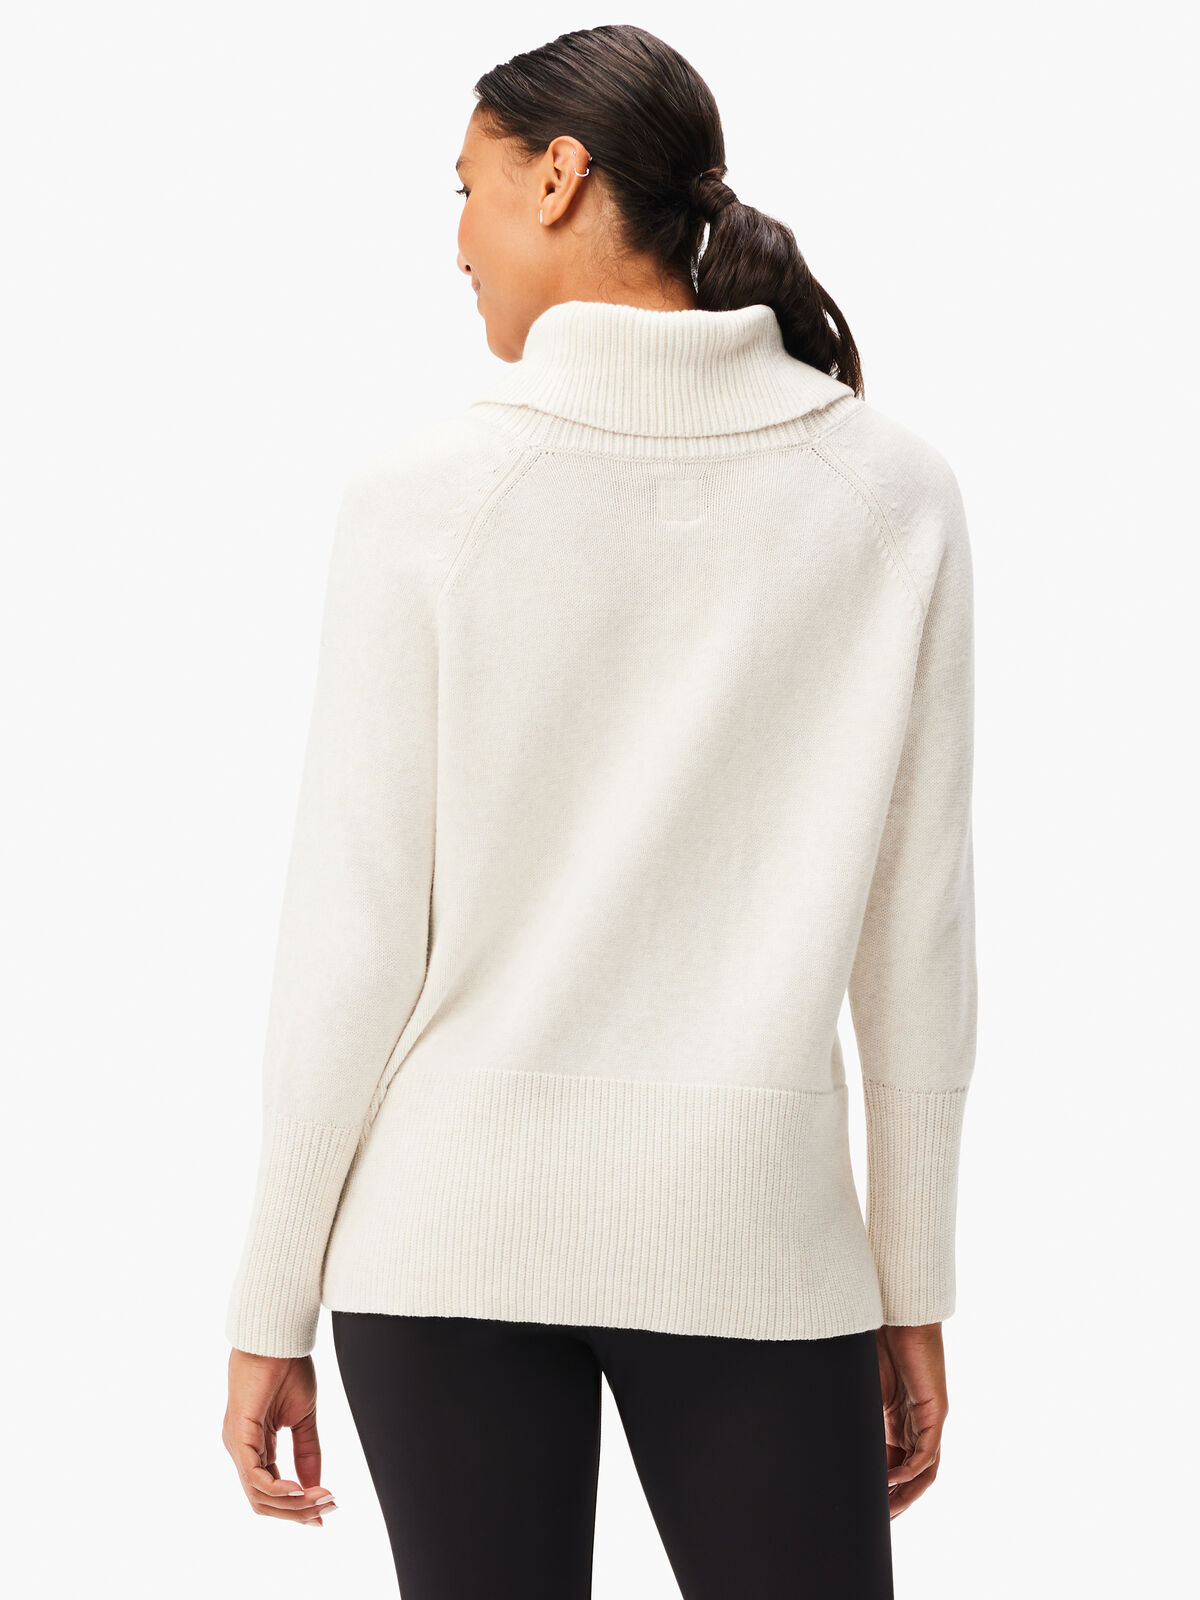 Cool Down Turtleneck Sweater